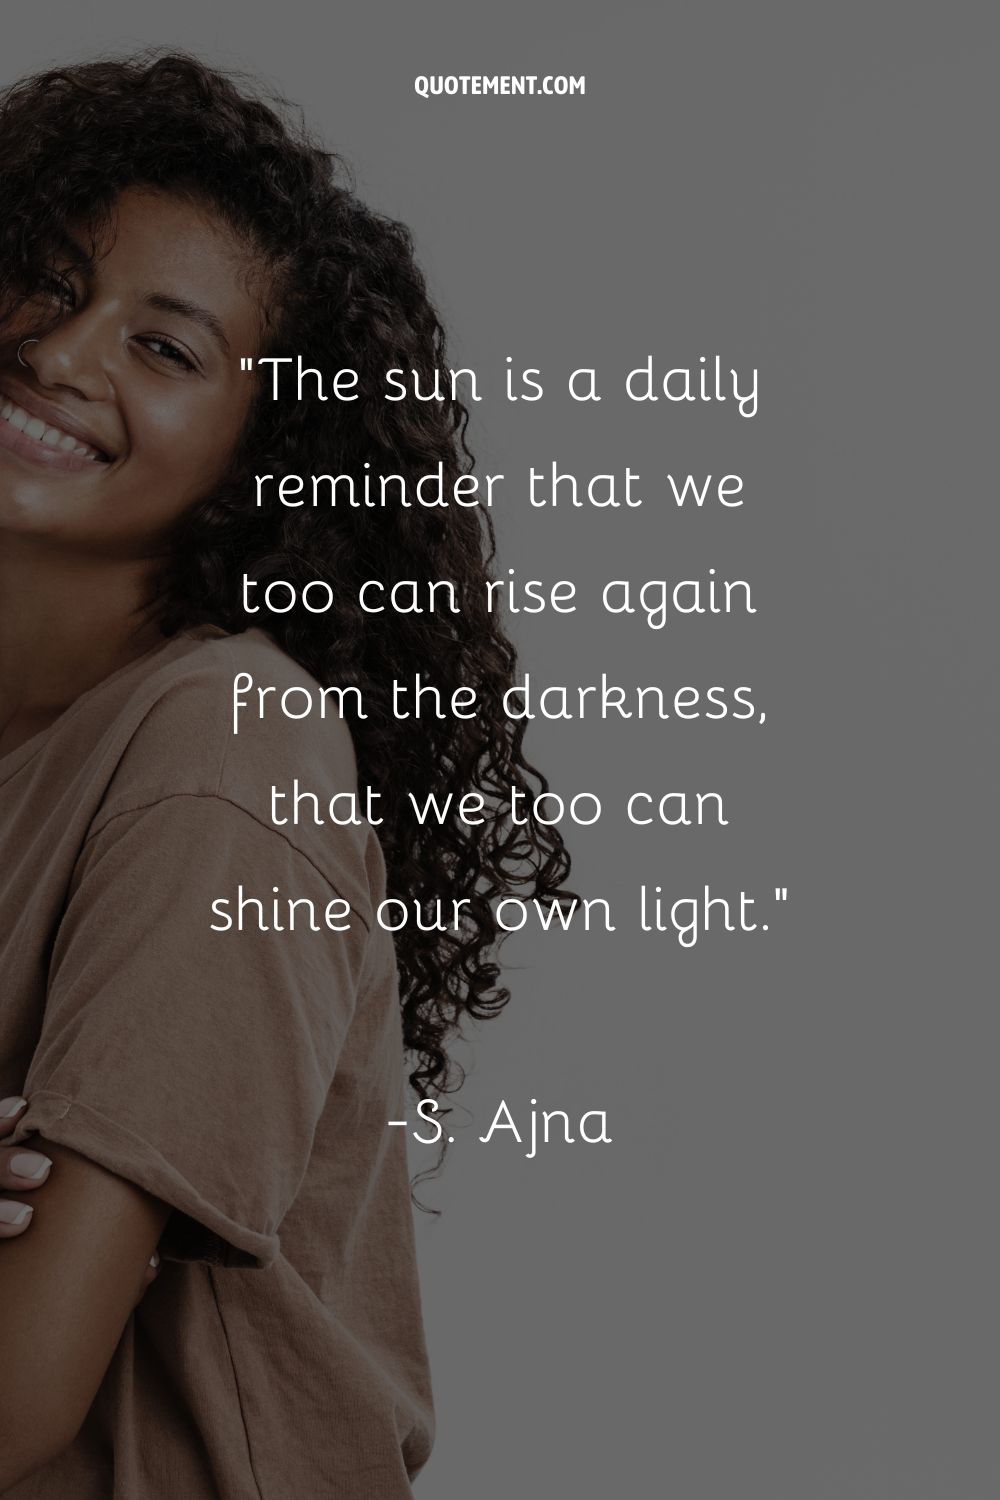 The sun is a daily reminder that we too can rise again from the darkness, that we too can shine our own light